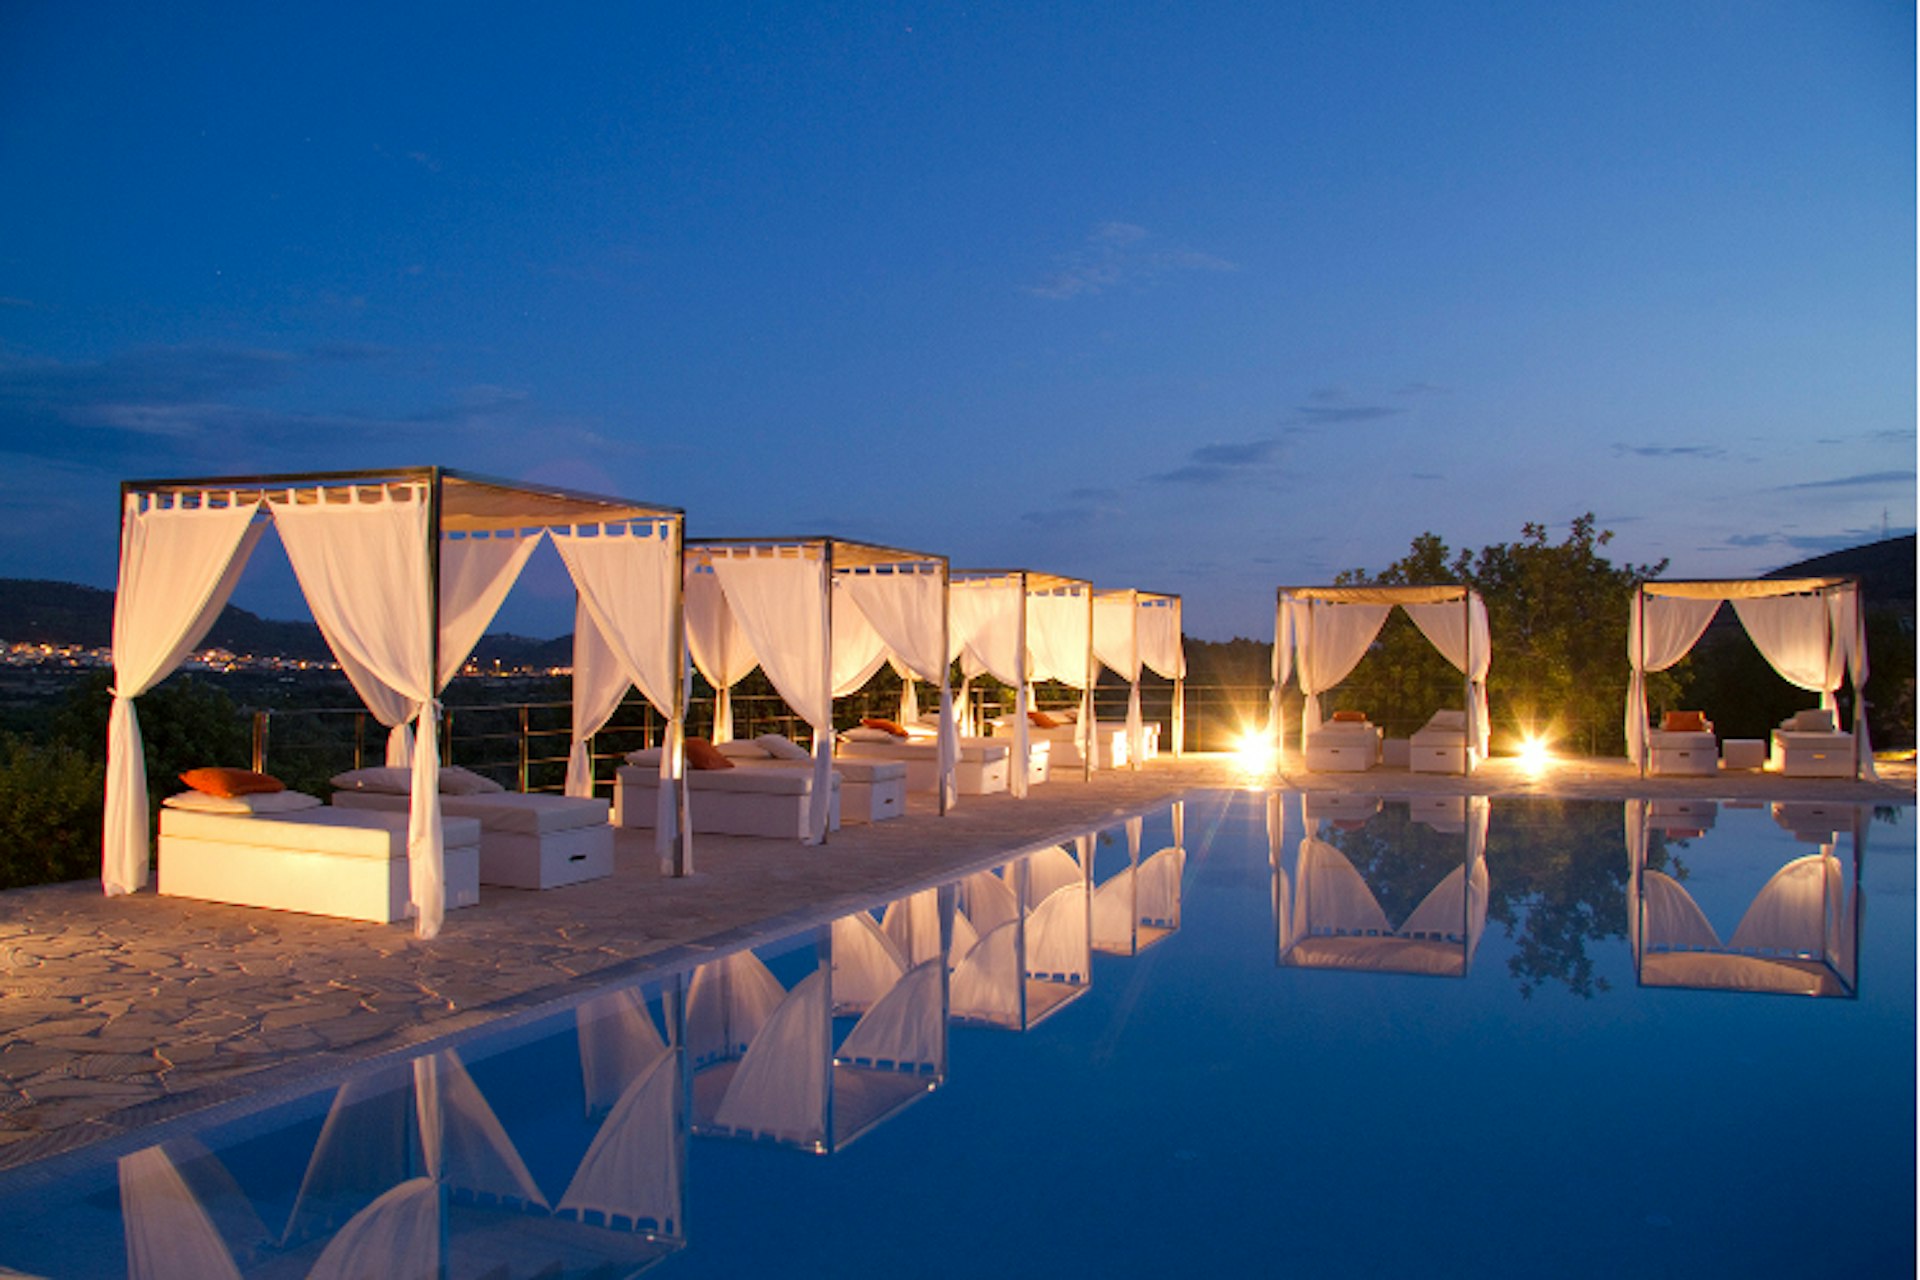 Crowd-free luxury at the Cases de Son Barbassa. Image by Kerry Christiani / Lonely Planet